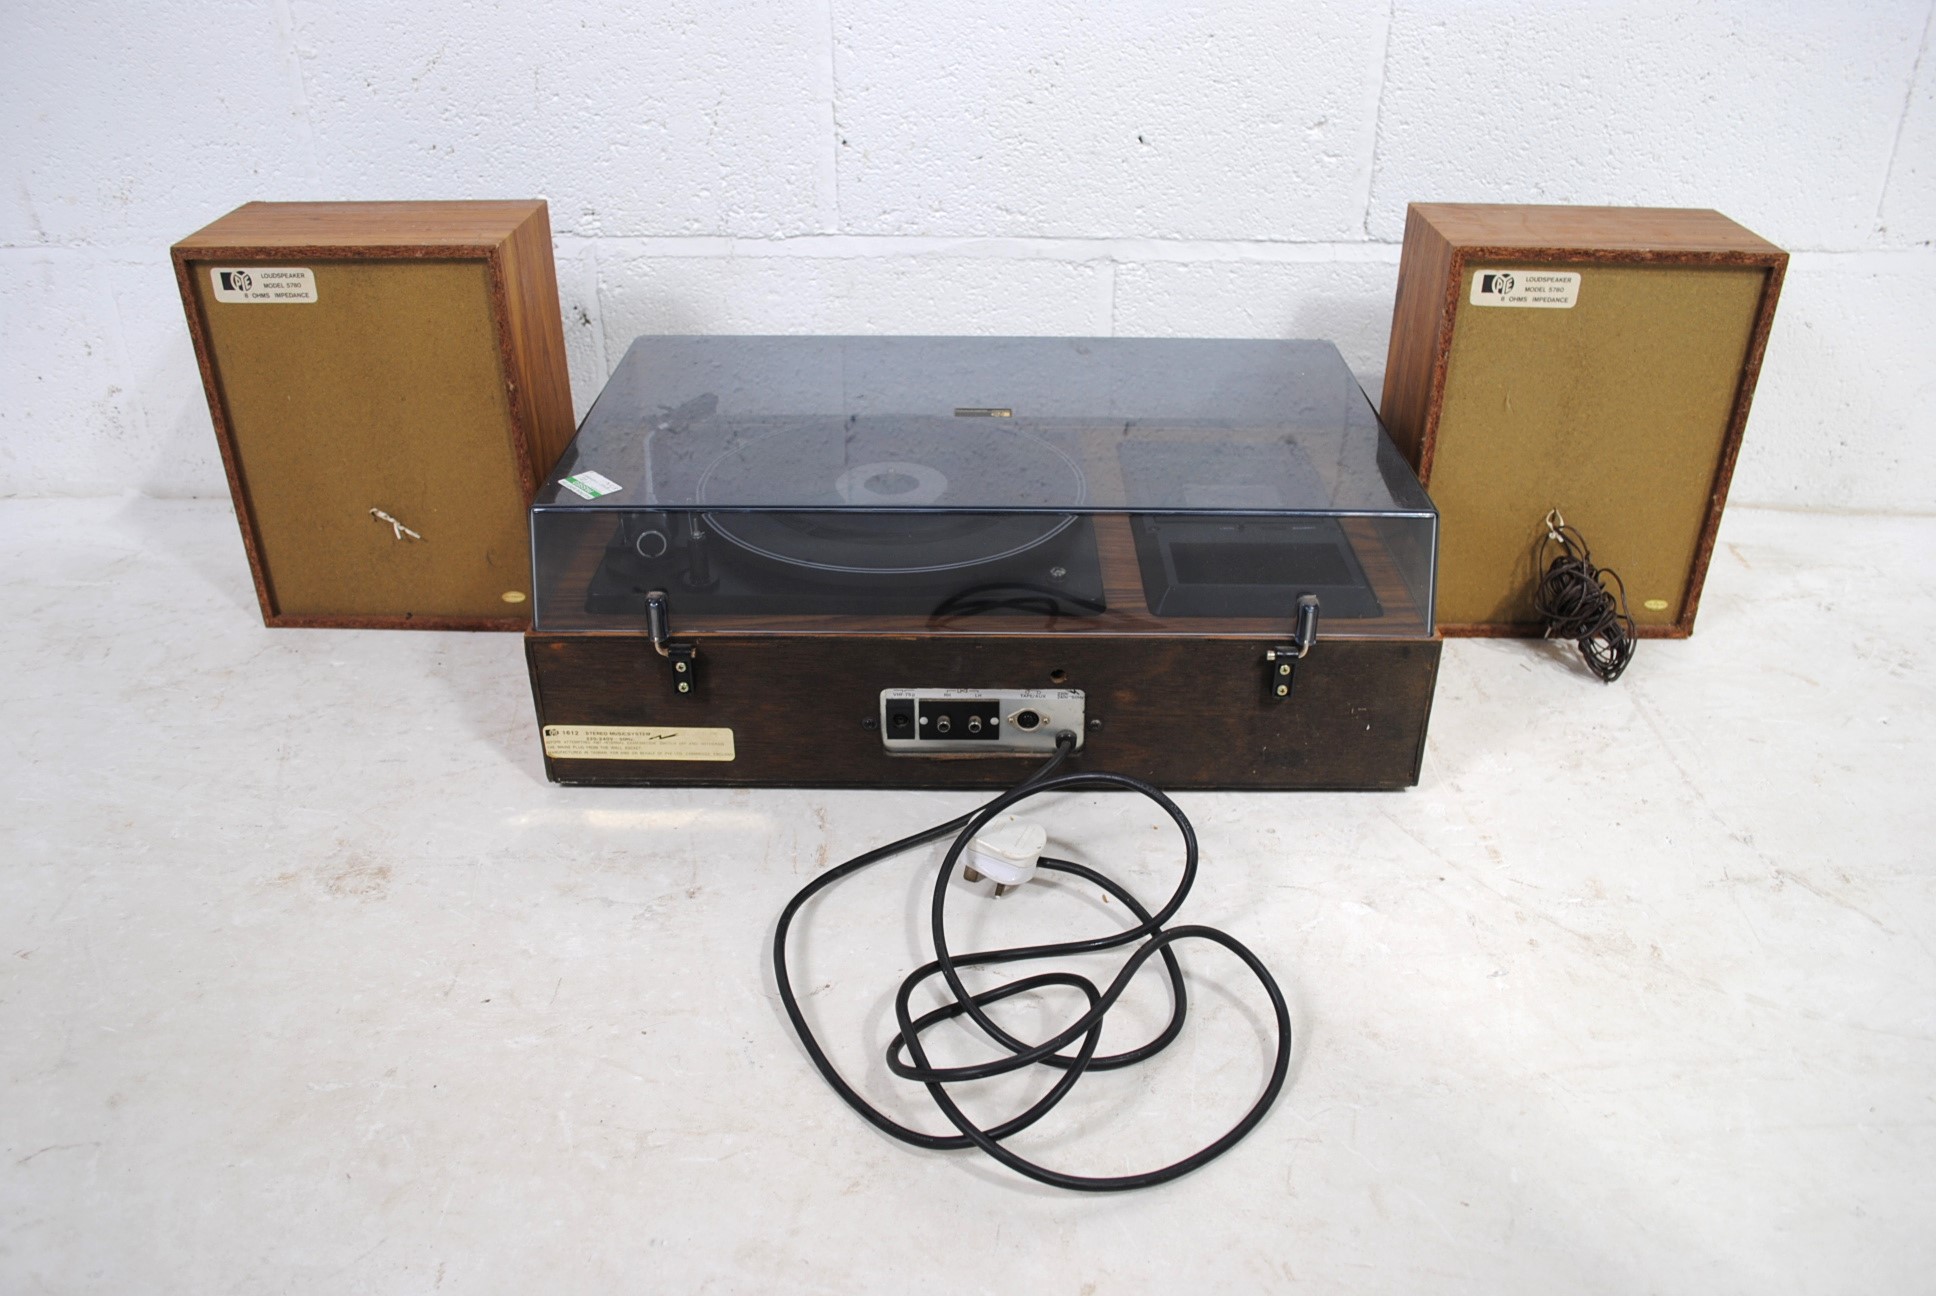 A vintage Pye 1612 stereo music system, including a pair of Pye 5780 8ohm bookshelf speakers - Image 8 of 11